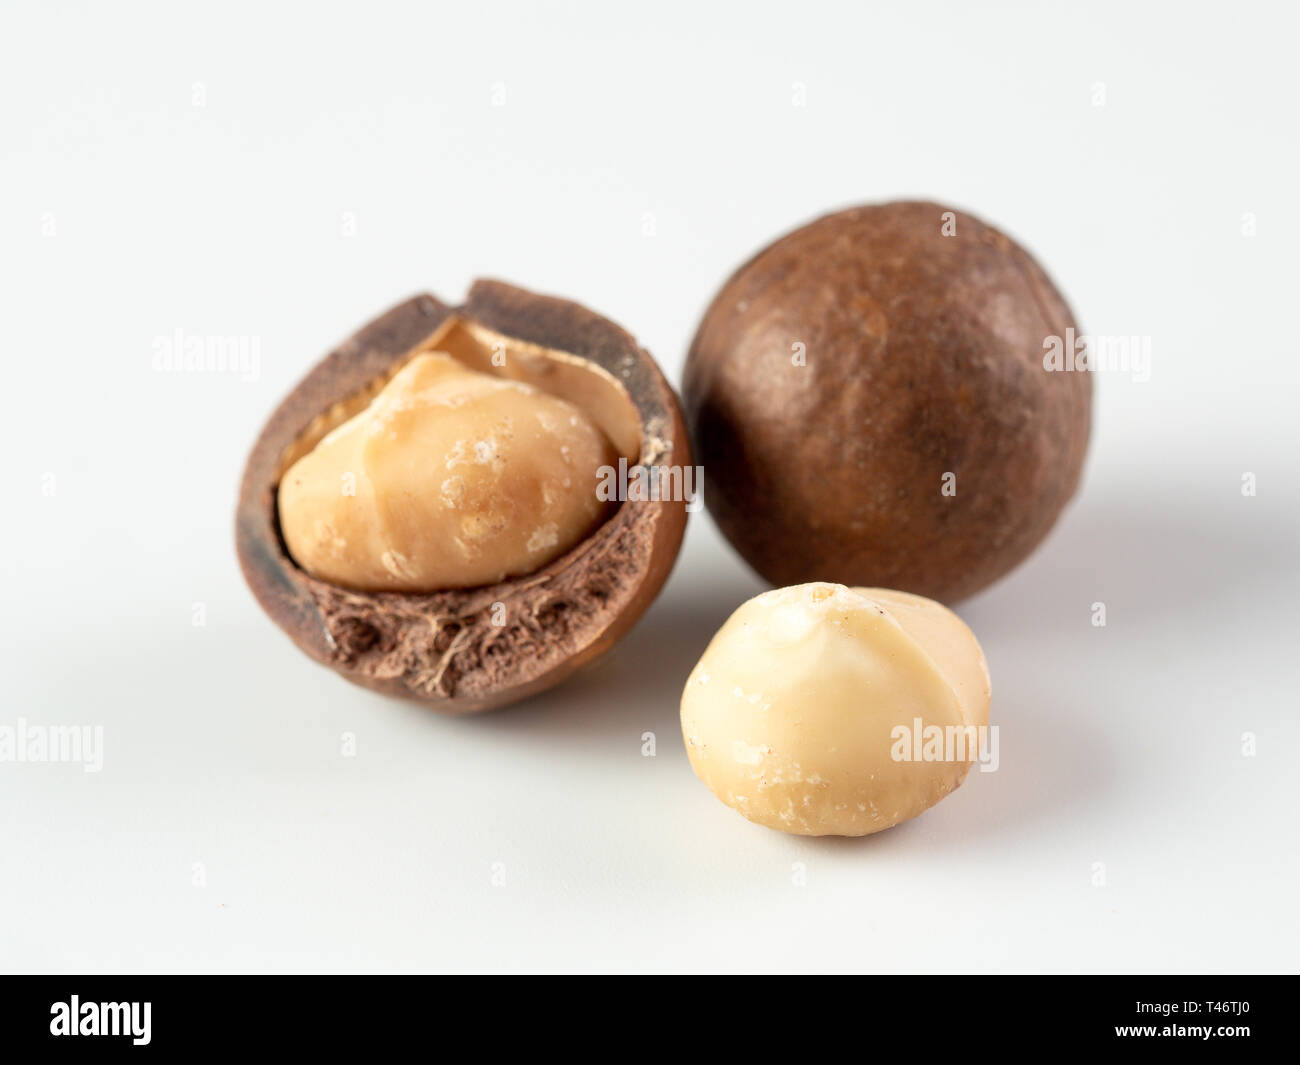 Three peeled macadamia nuts on white background. Set of three macadamia nuts - unshelled, with open shells, and shelled. isolated on white. Copy space for text. Stock Photo